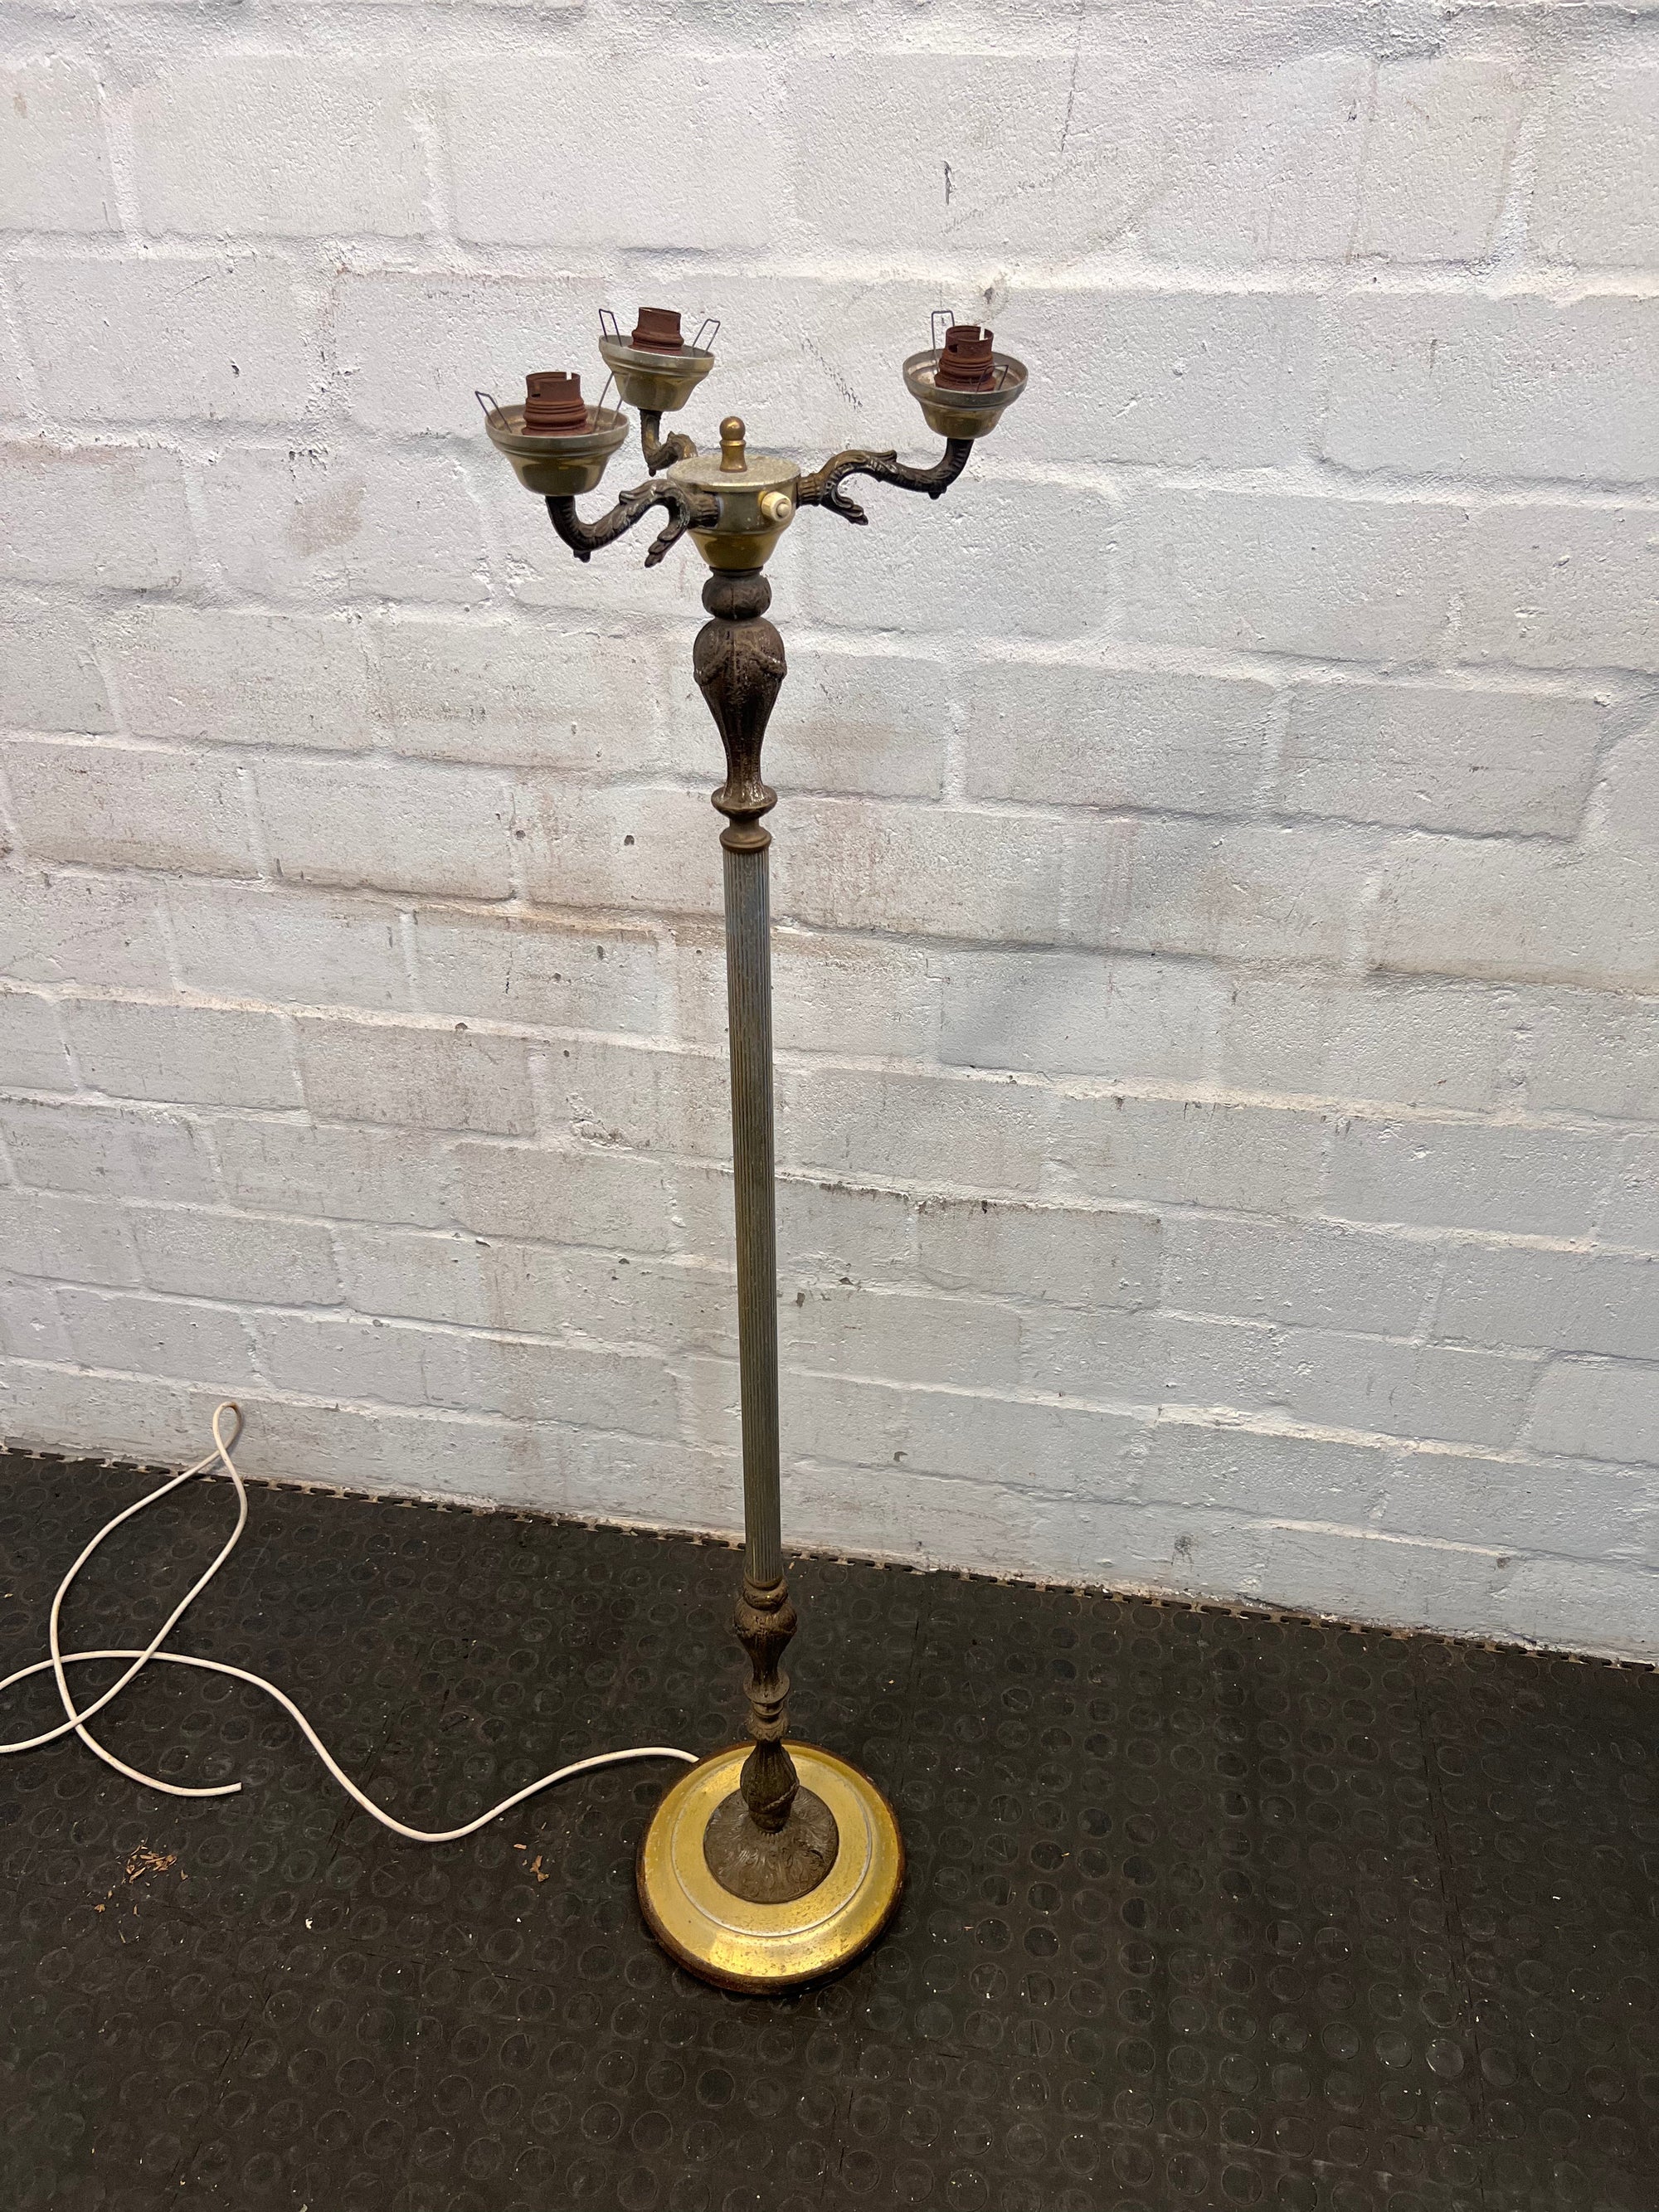 Vintage Decorative Standing Lamp -2 Light Fittings - Working